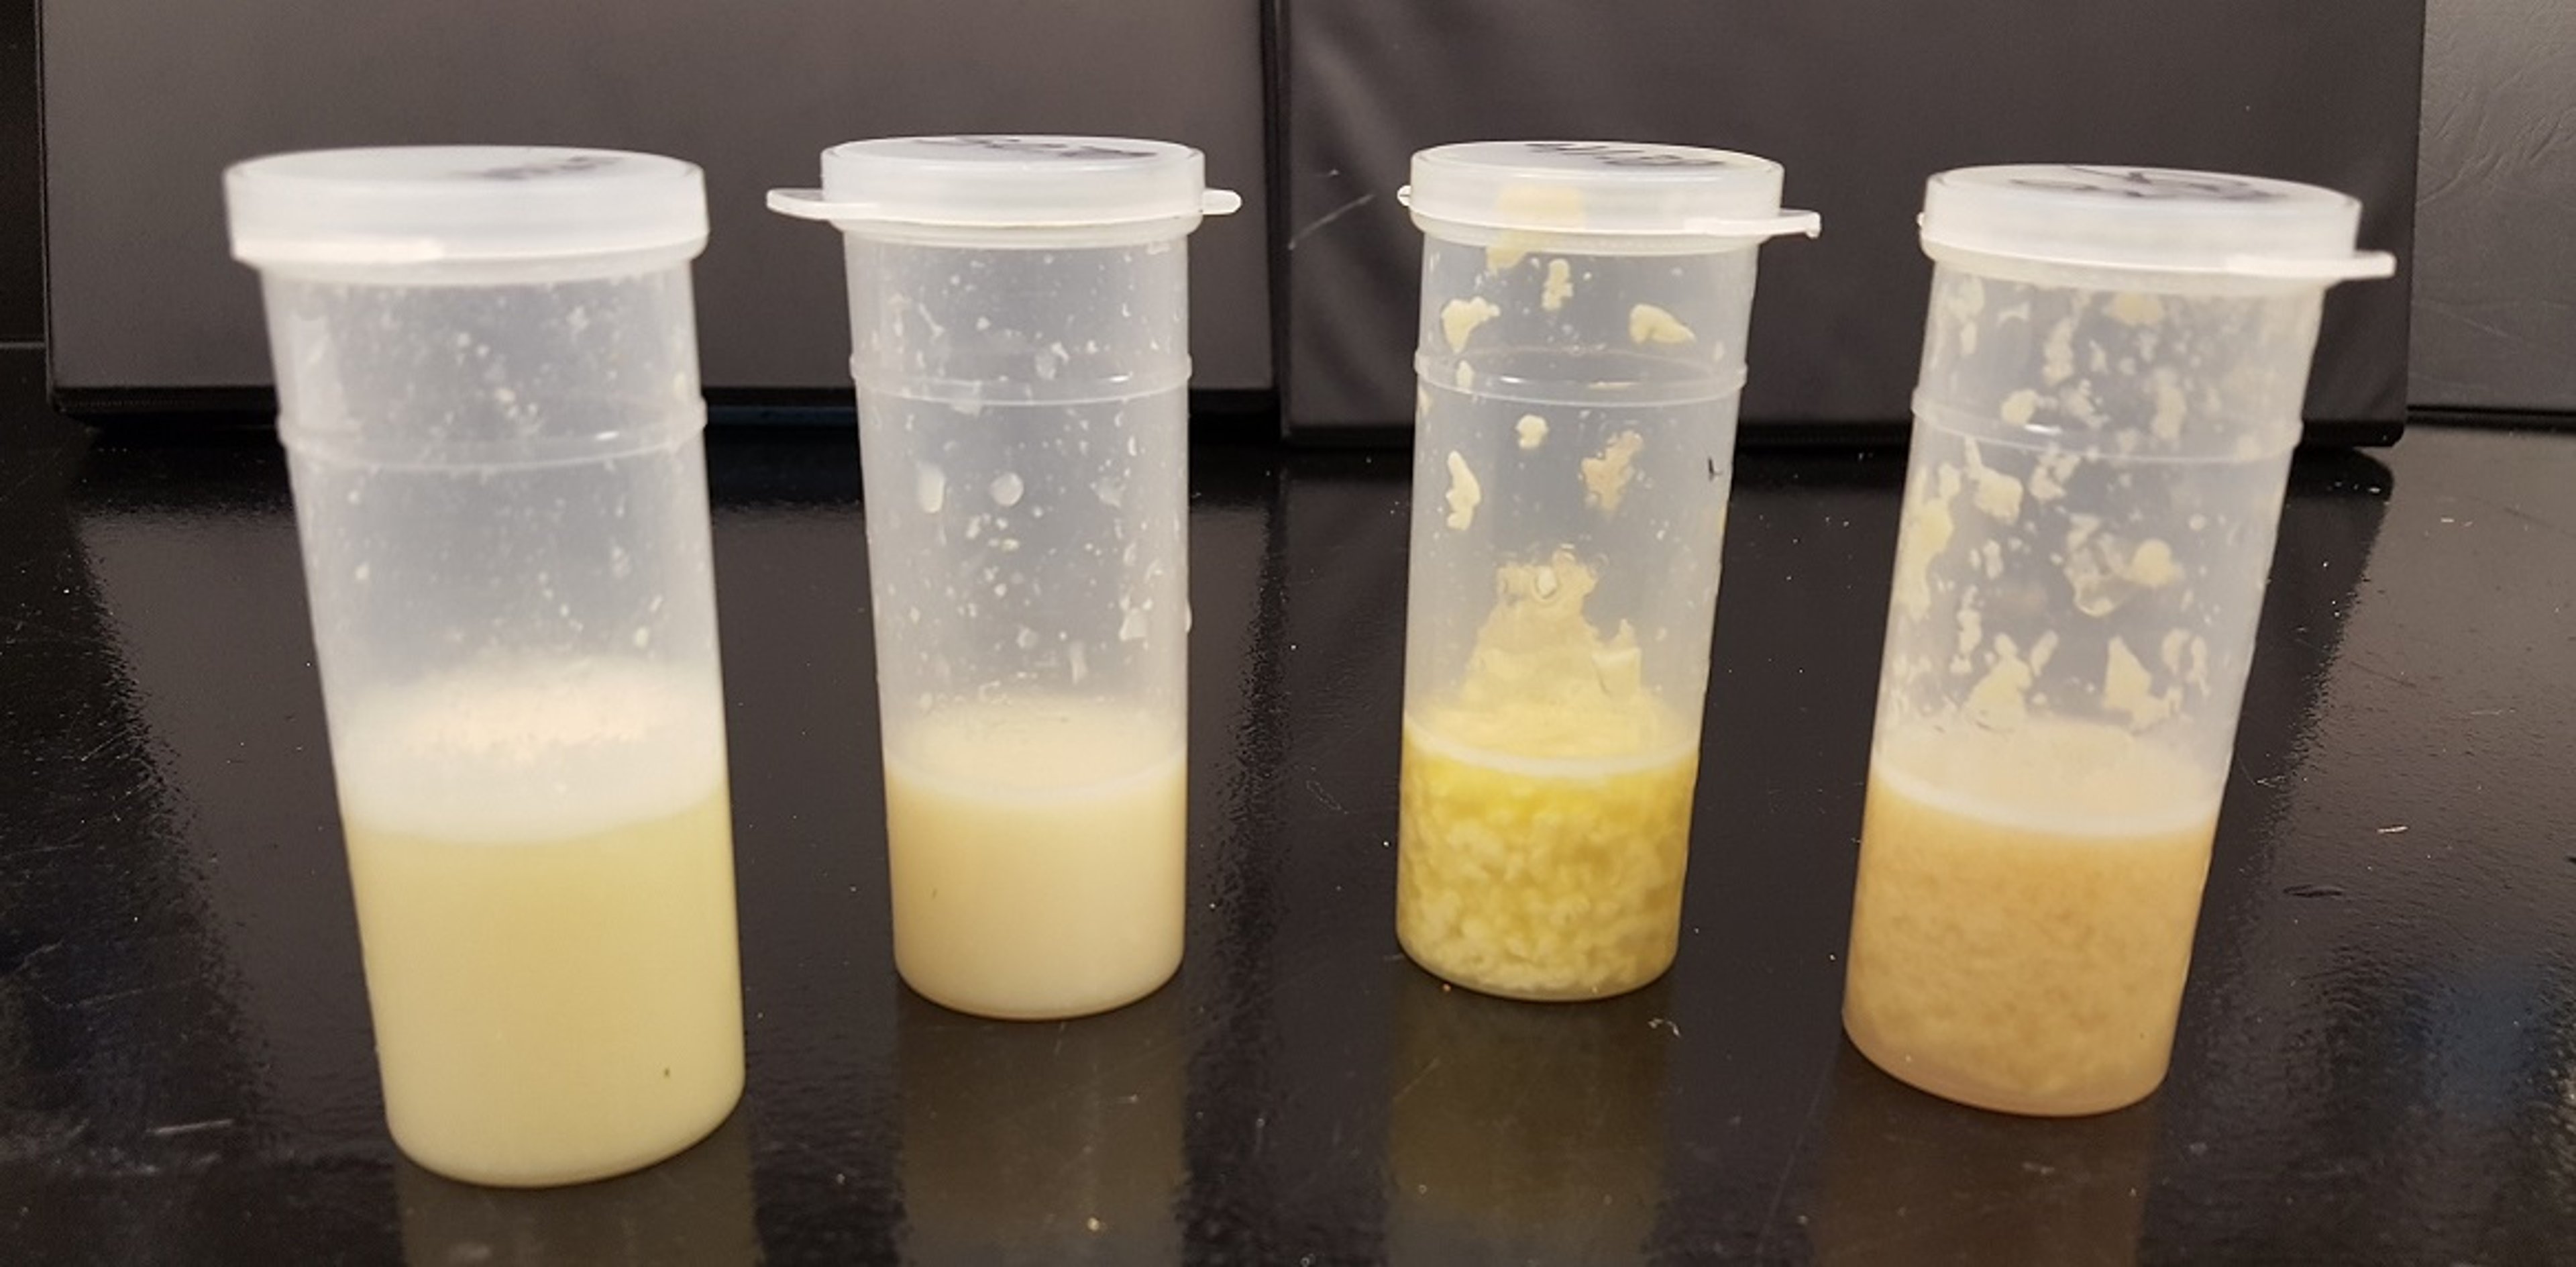 Abnormal milk from cases of mild clinical mastitis